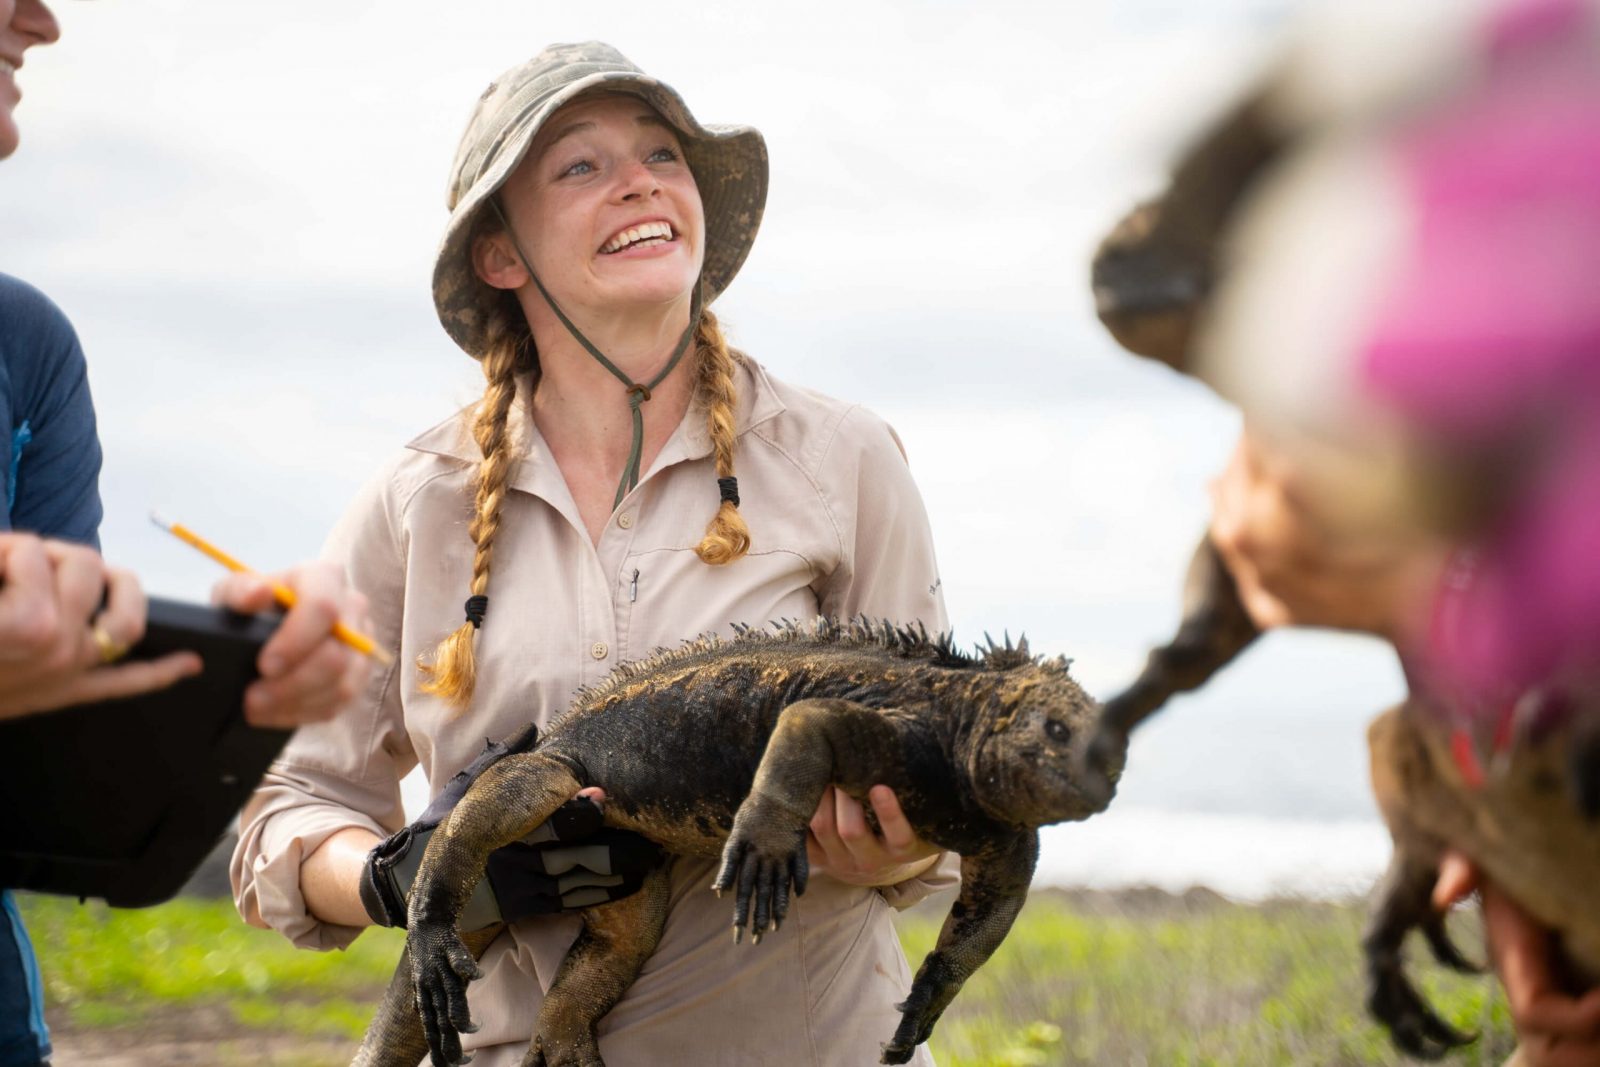 A female researcher smiles at her colleagues as she holds a marine iguana.